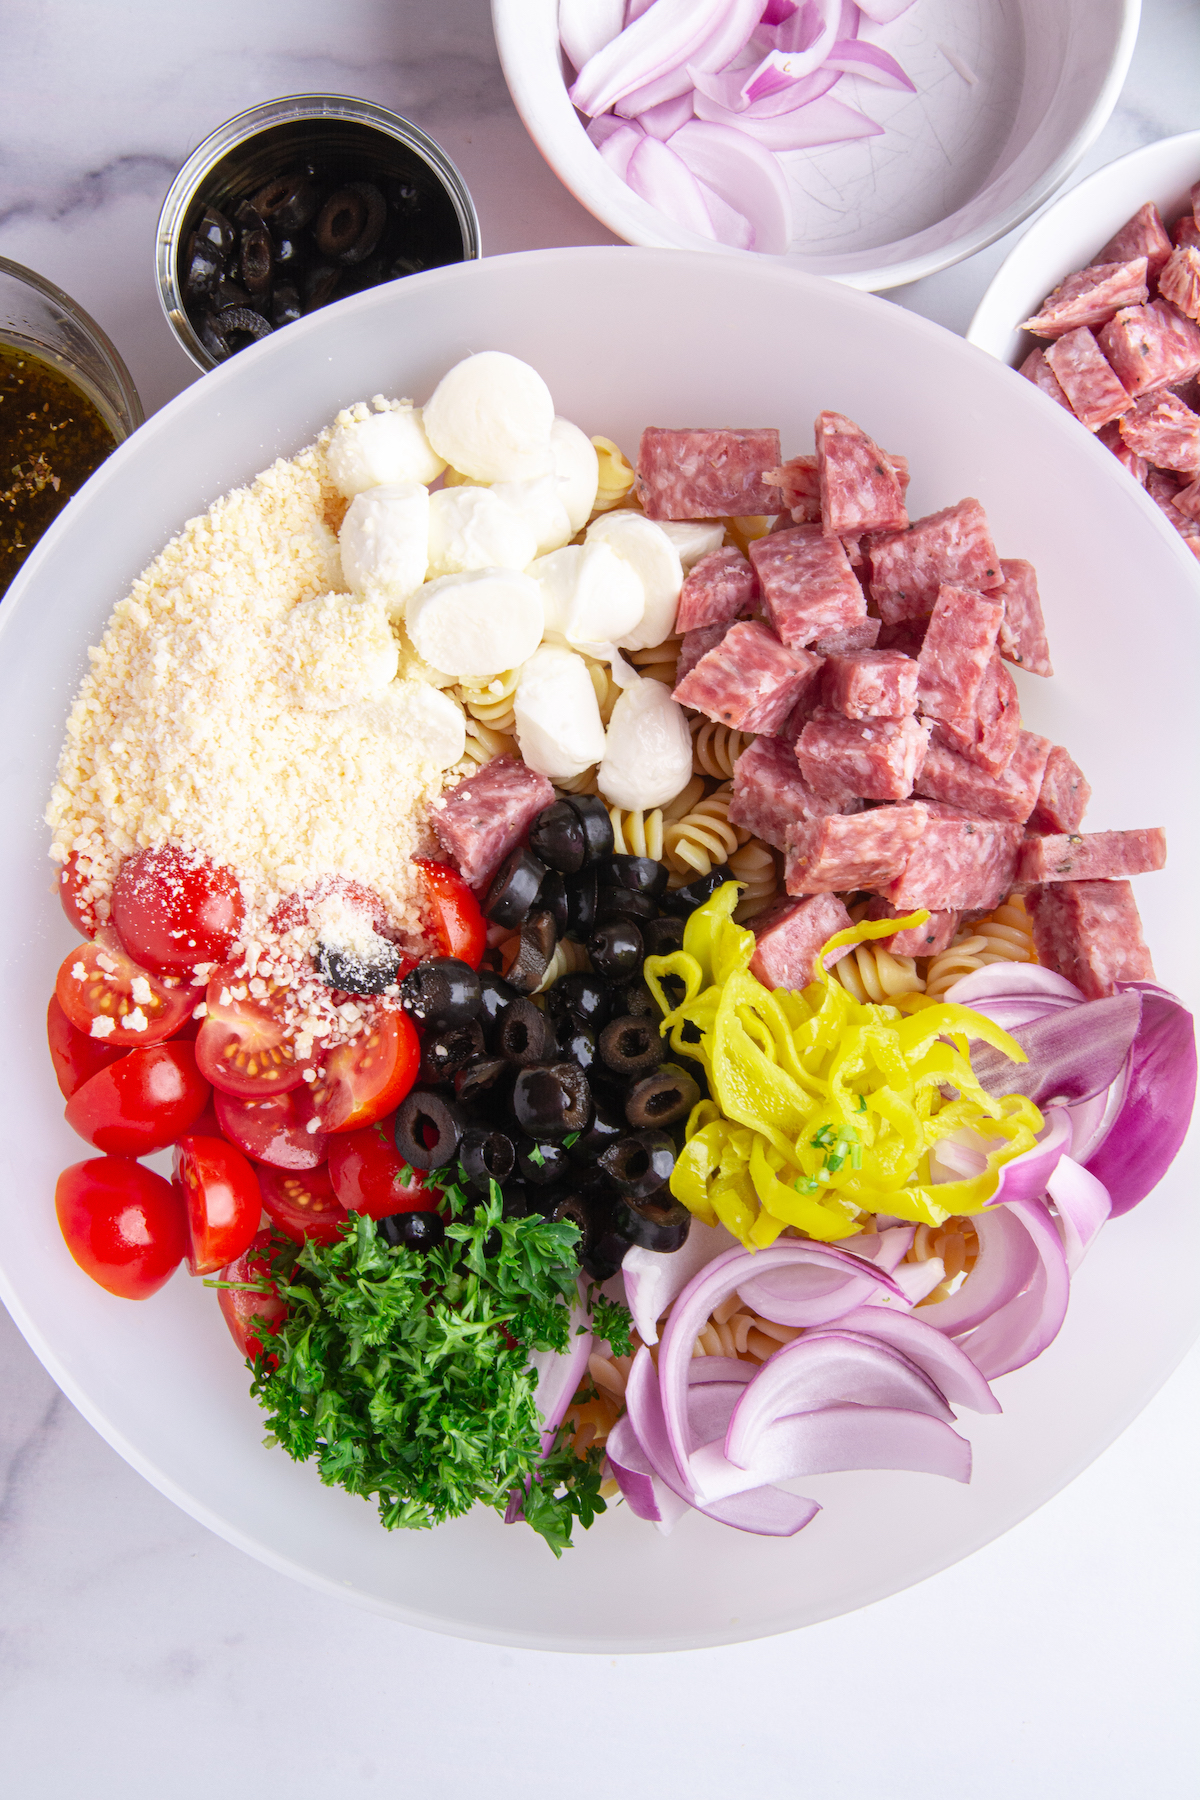 A bowl of ingredients for pasta salad. Cooked rotini pasta, sliced cherry tomatoes, chopped parsley, sliced red onion, sliced pepperoncini, sliced black olives, chopped dry salami, mozzarella balls, grated Parmesan cheese.